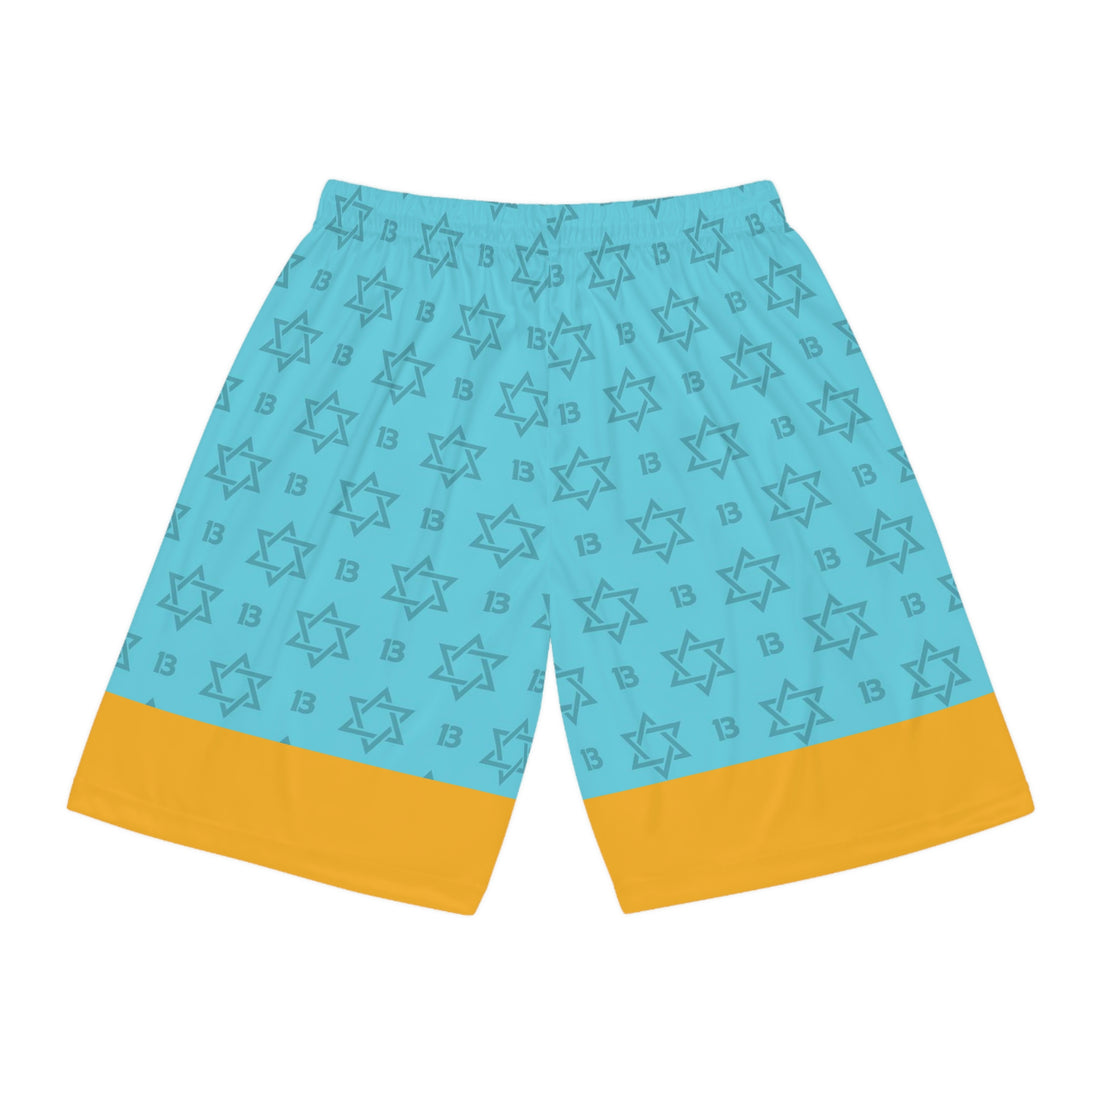 Father Yod's Team Teal Shorts